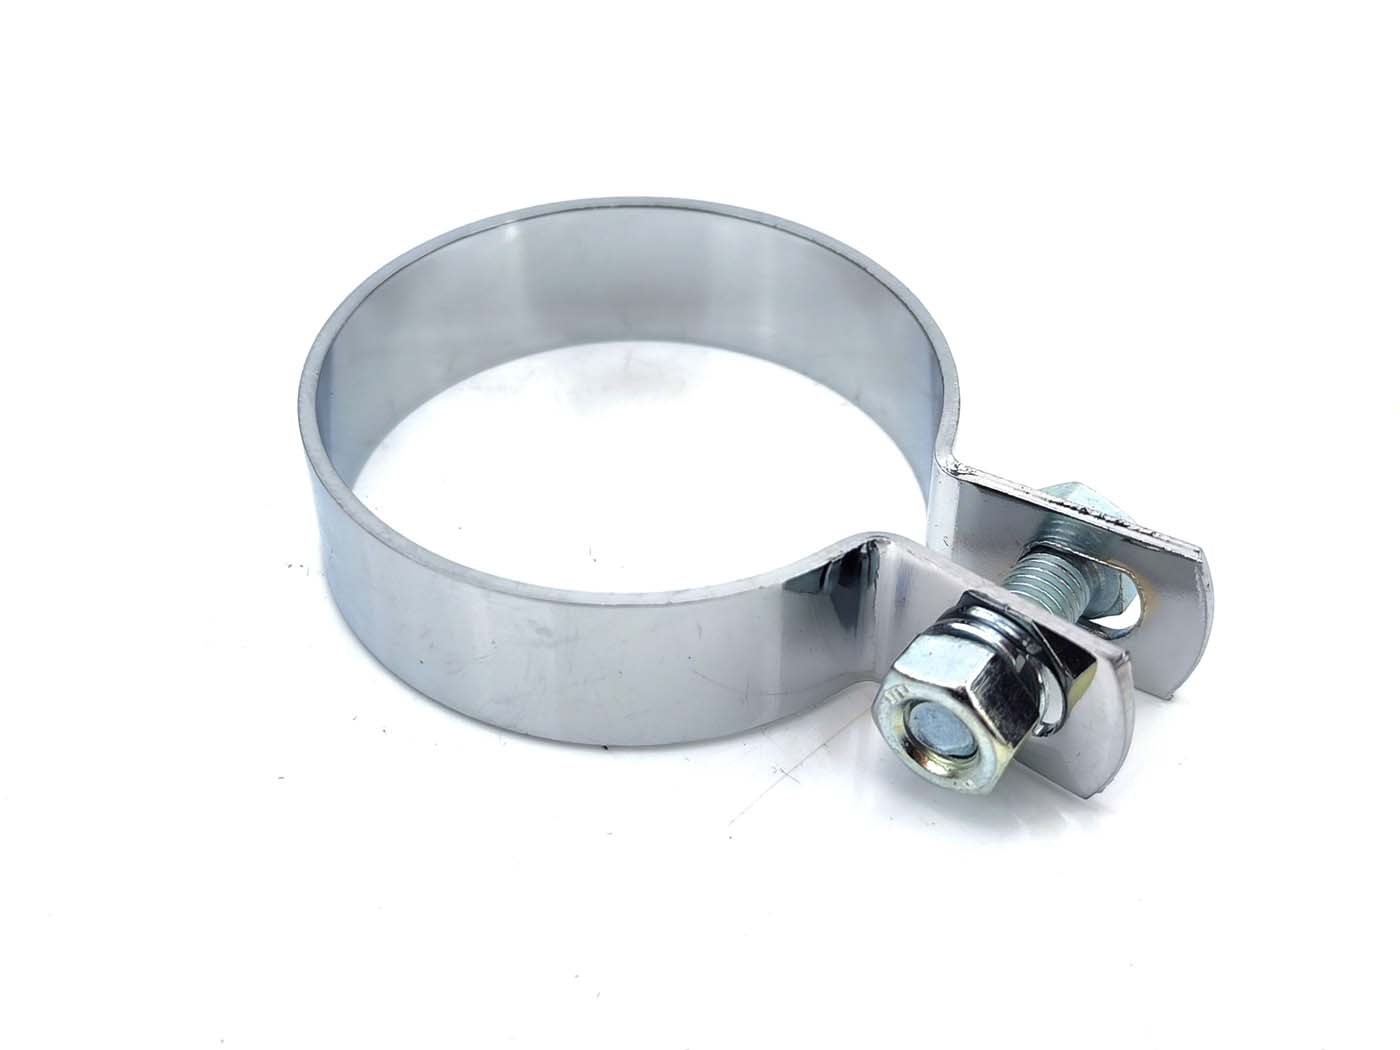 Exhaust Clamp 60mm Chrome For Moped Moped Mokick